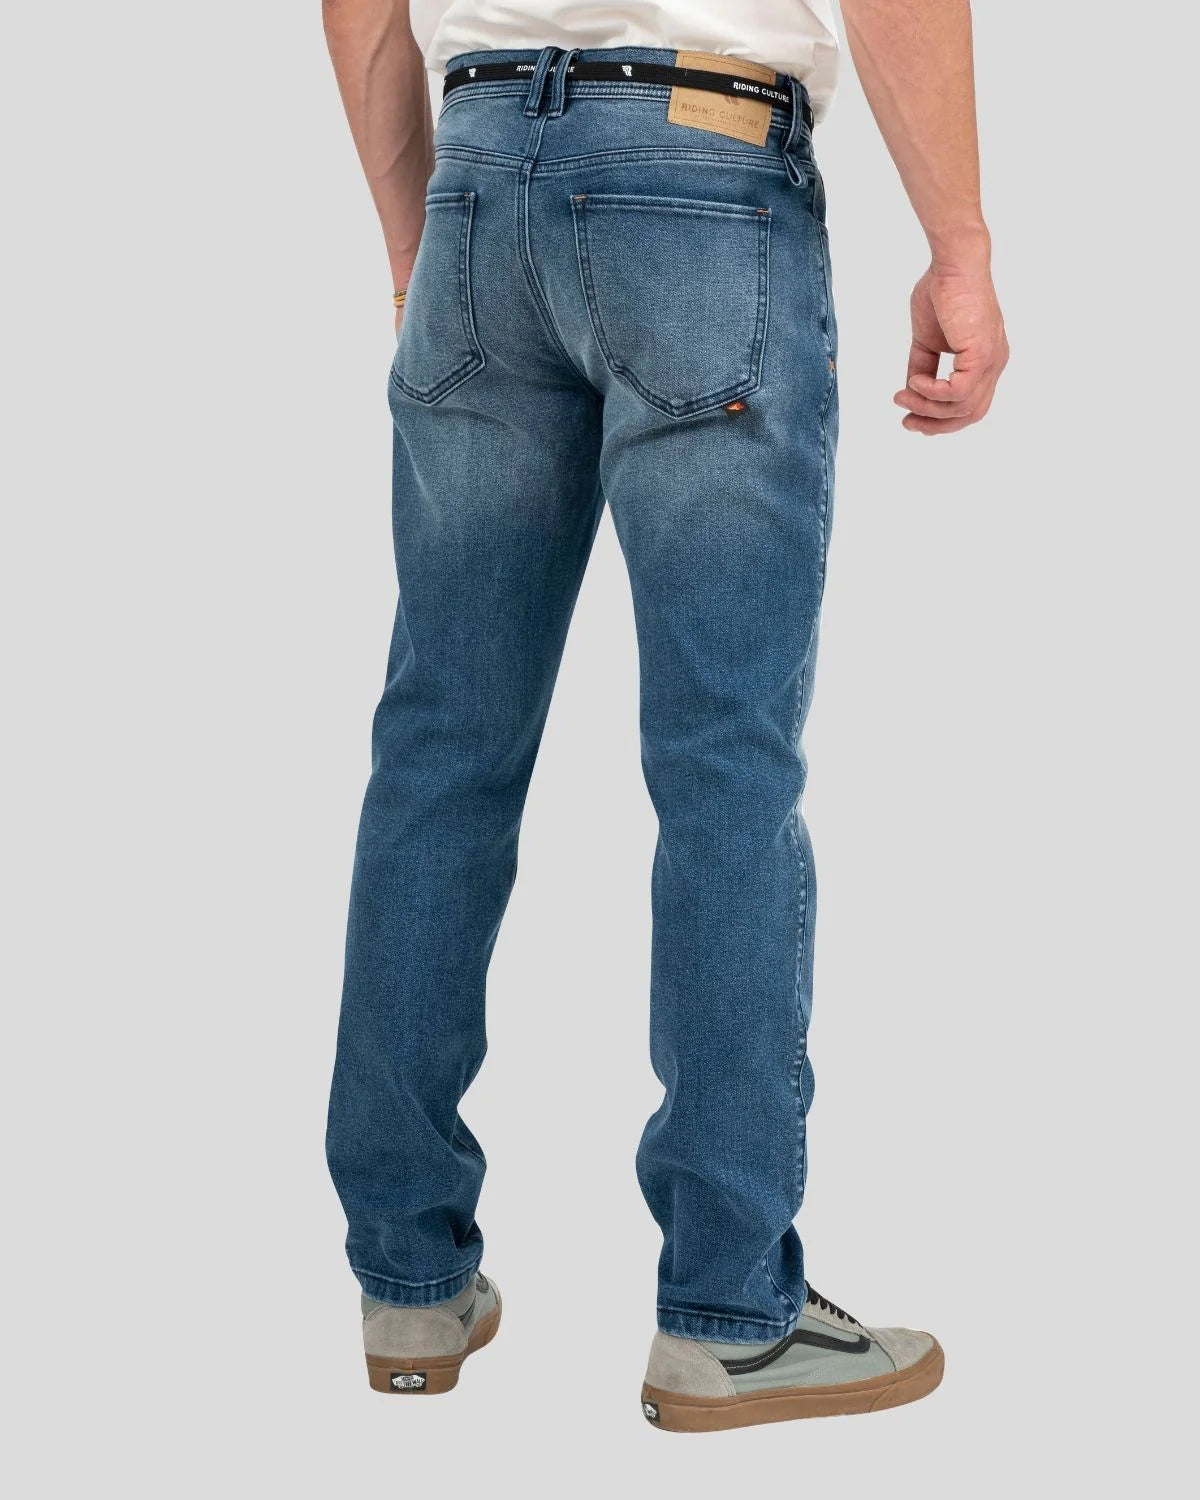 Riding Culture Tapered Slim Jeans - Light Blue